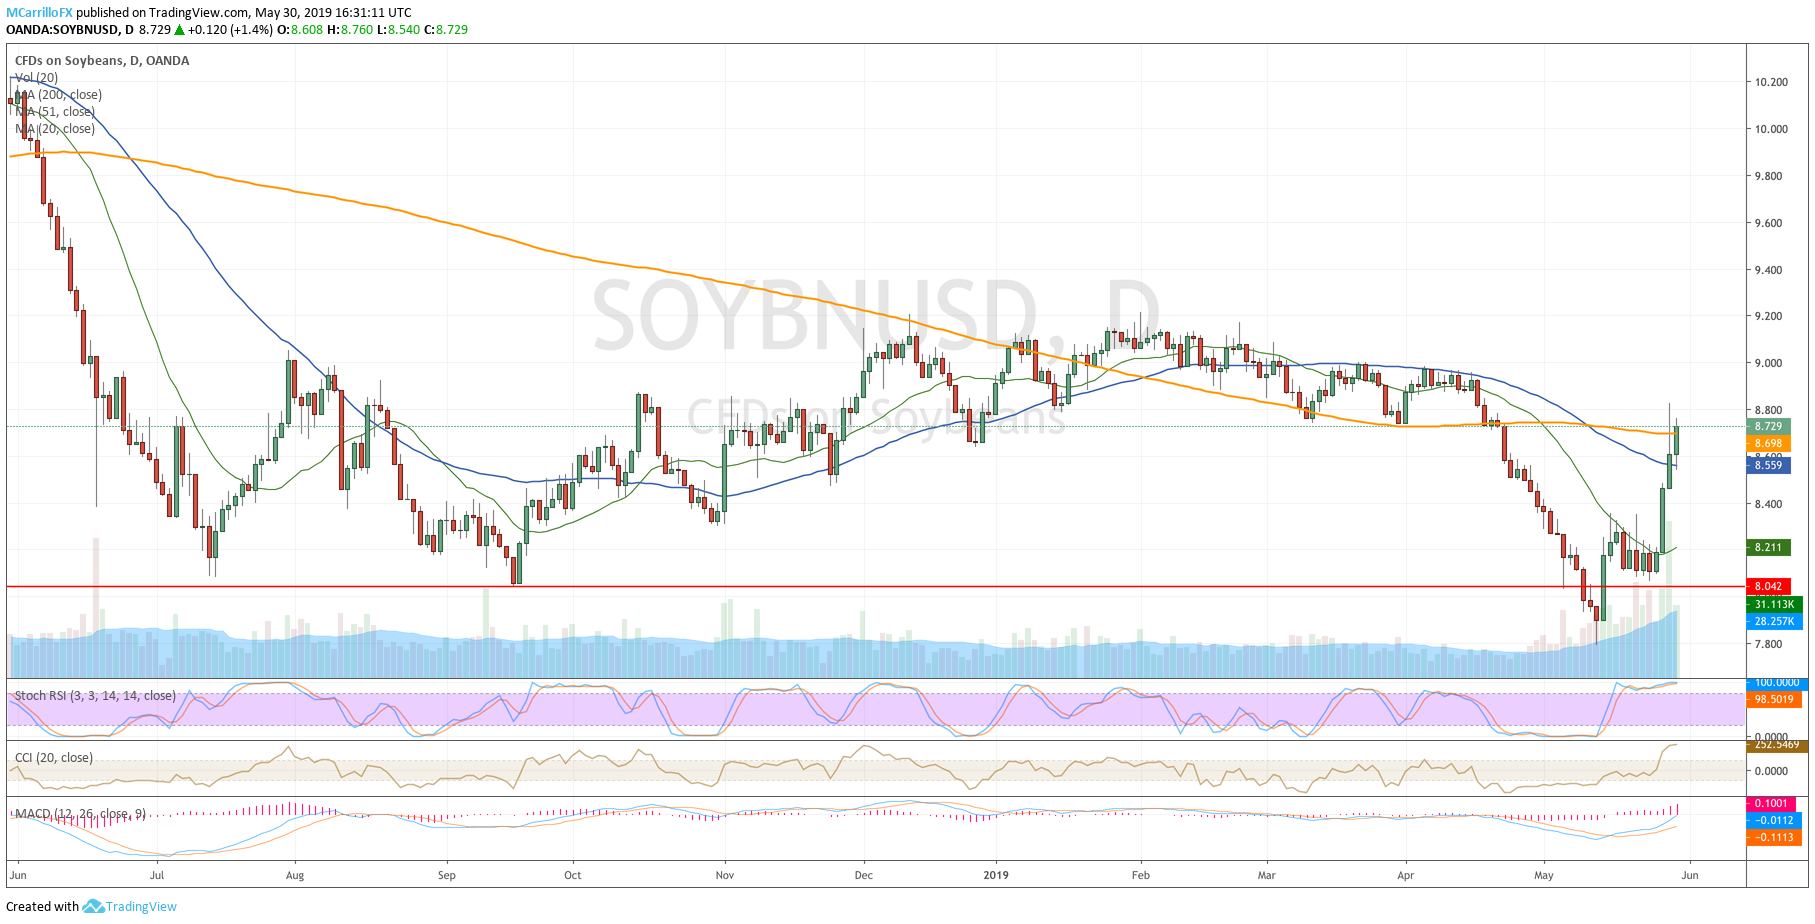 Soybeans daily chart May 30